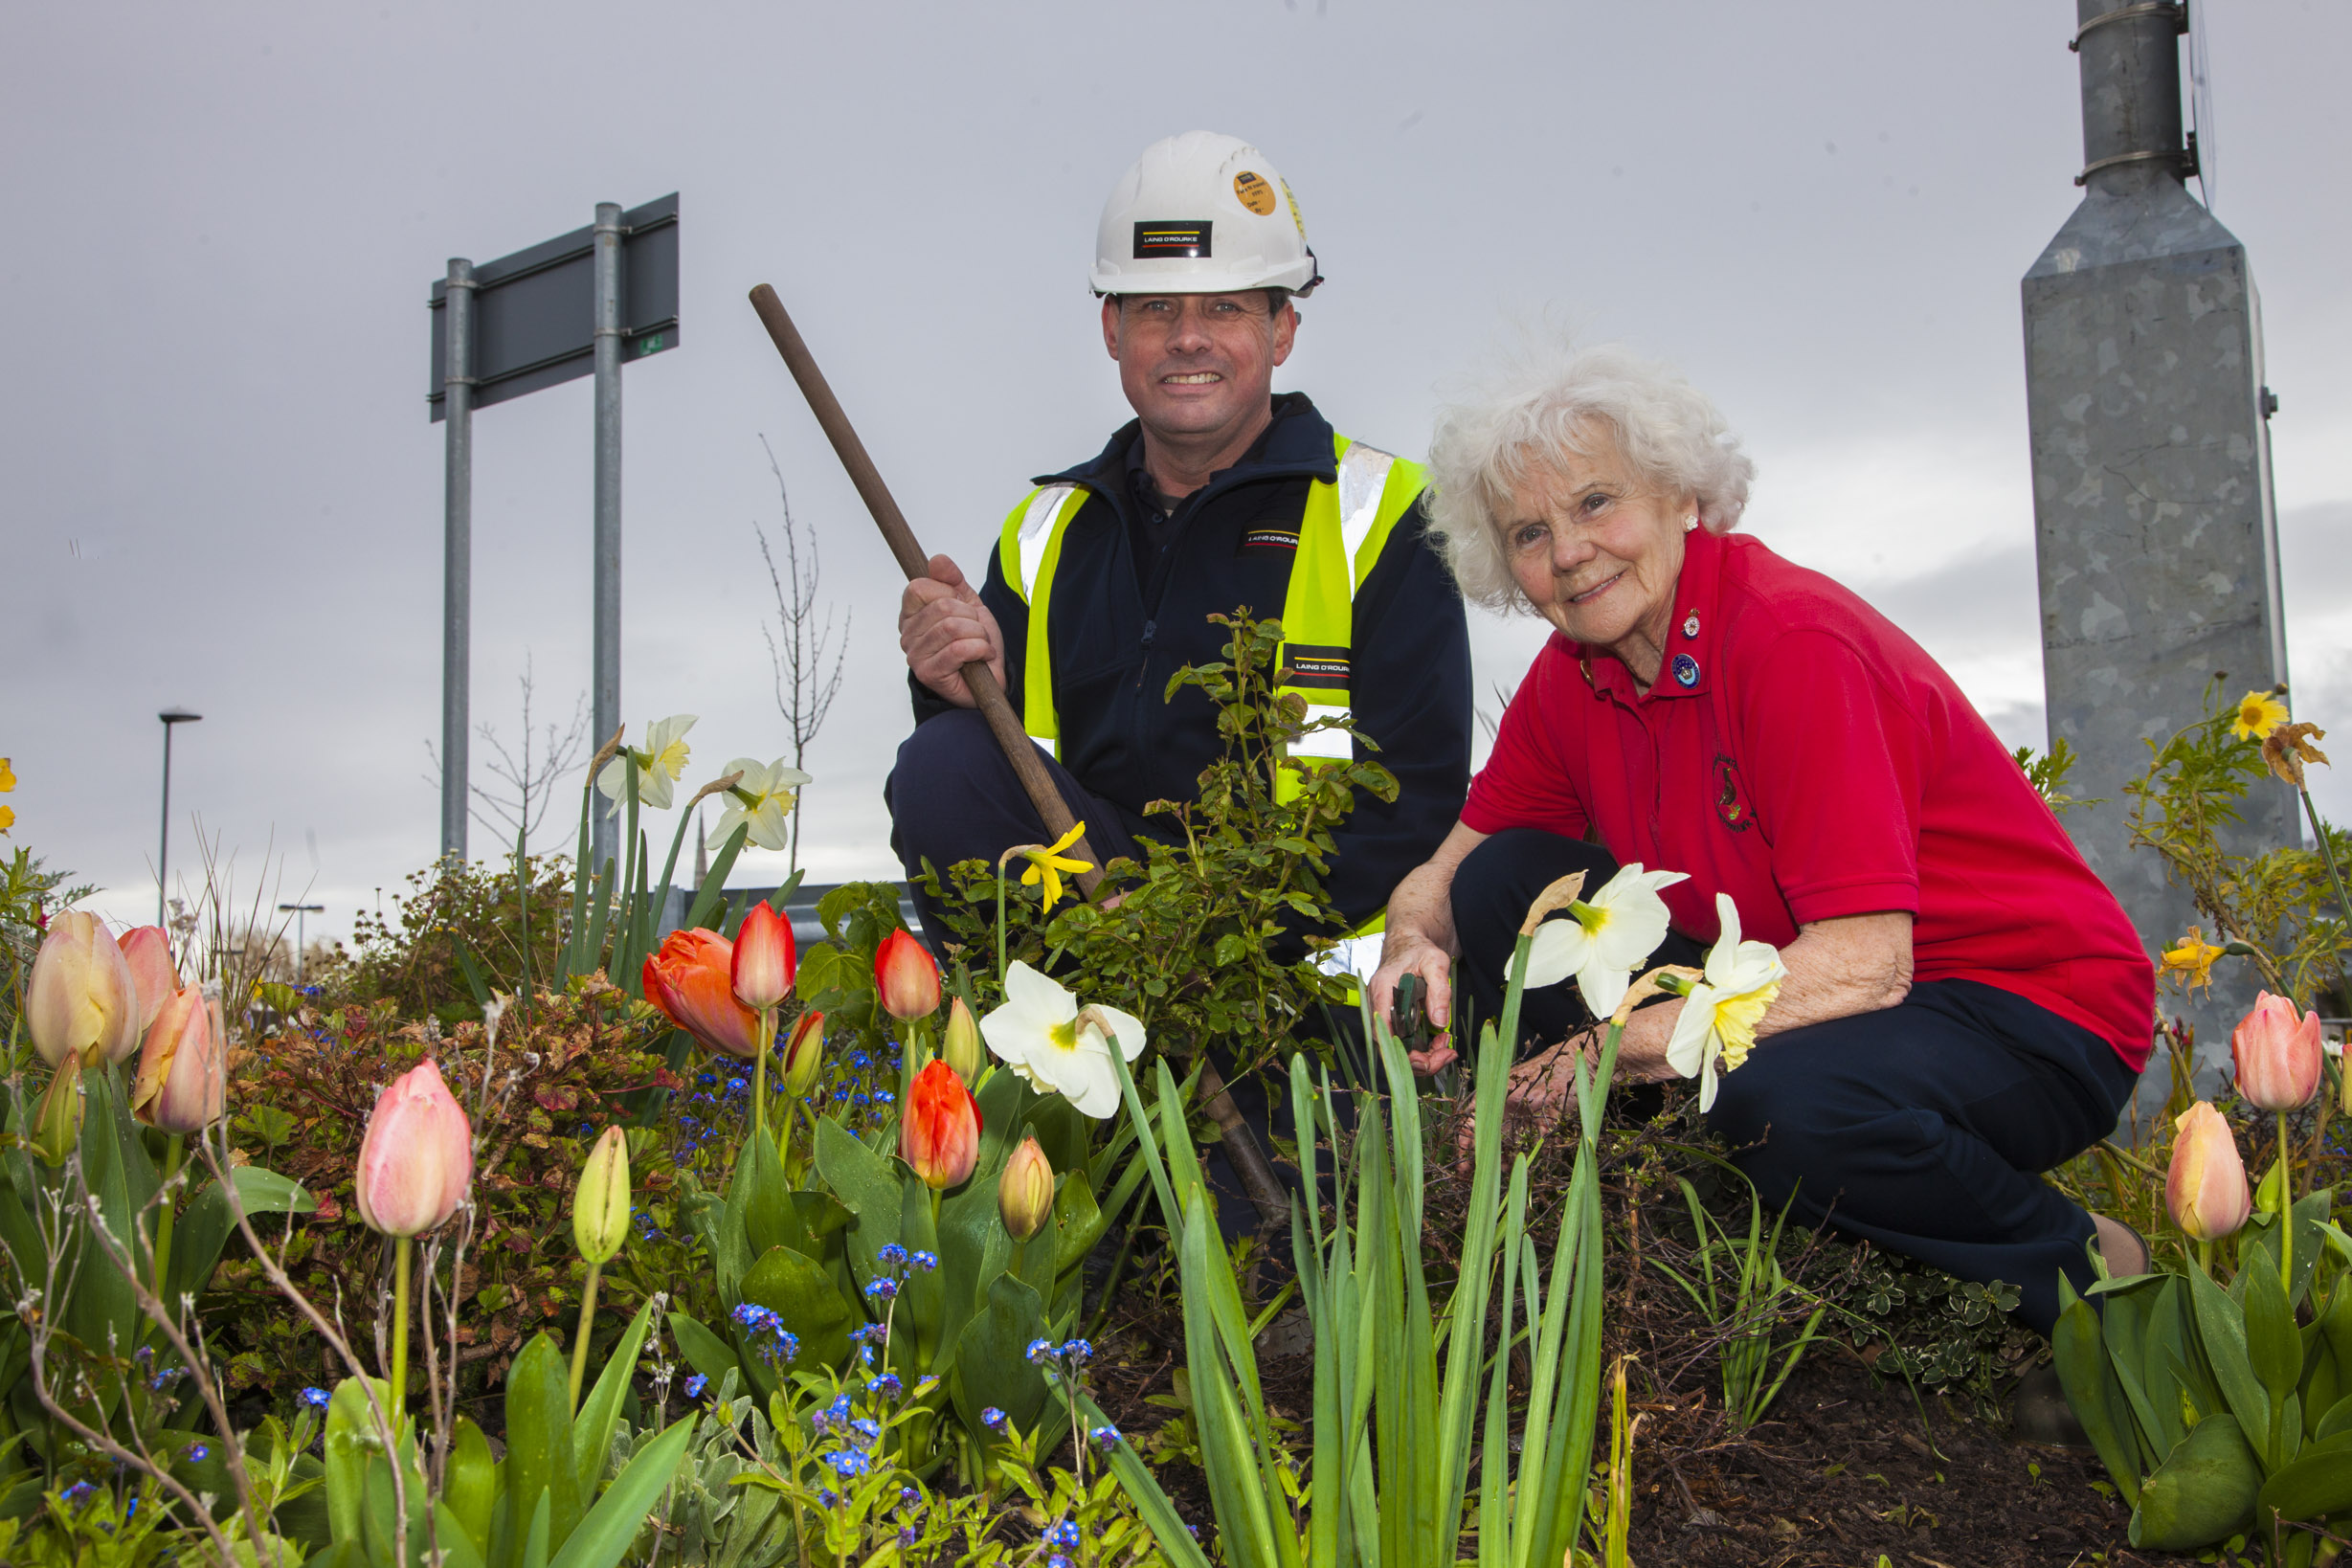 Construction workers help Phyllis turn hospital green for patients and visitors